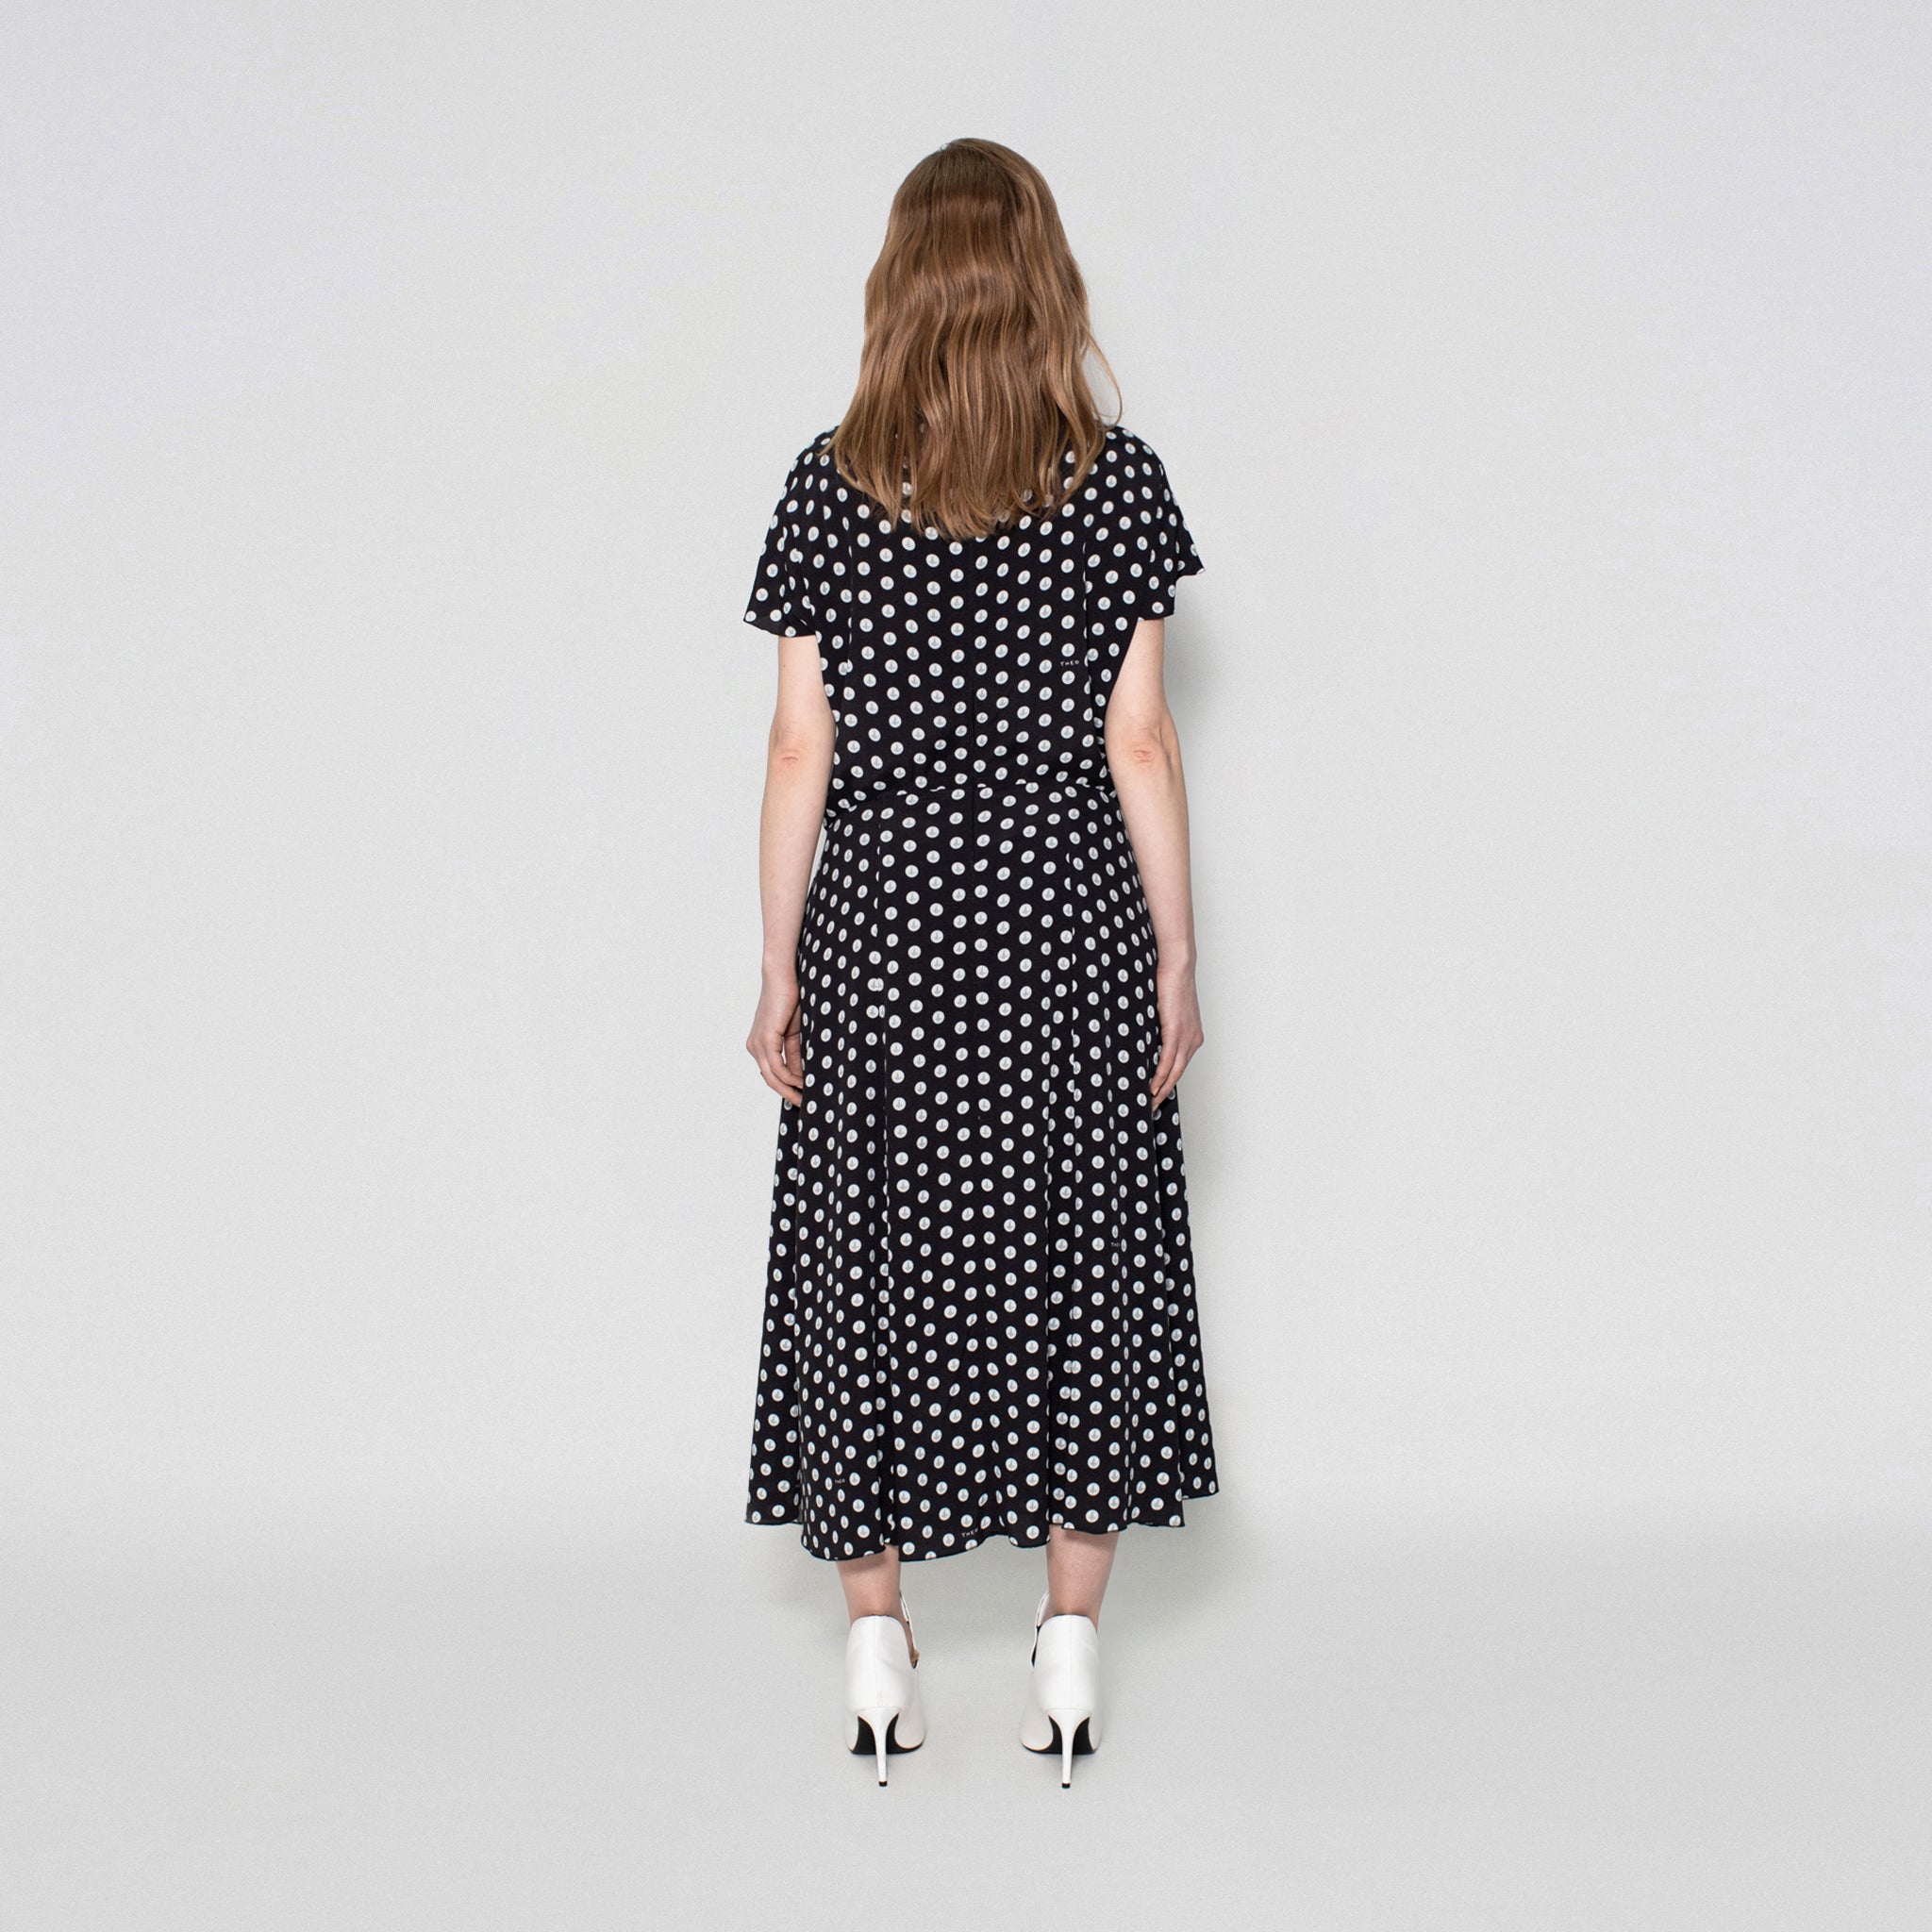 FLUID DRESS IN CREPE DE CHINE WITH POLKA PEARLS PRINT WITH MARTINGALE DETAIL